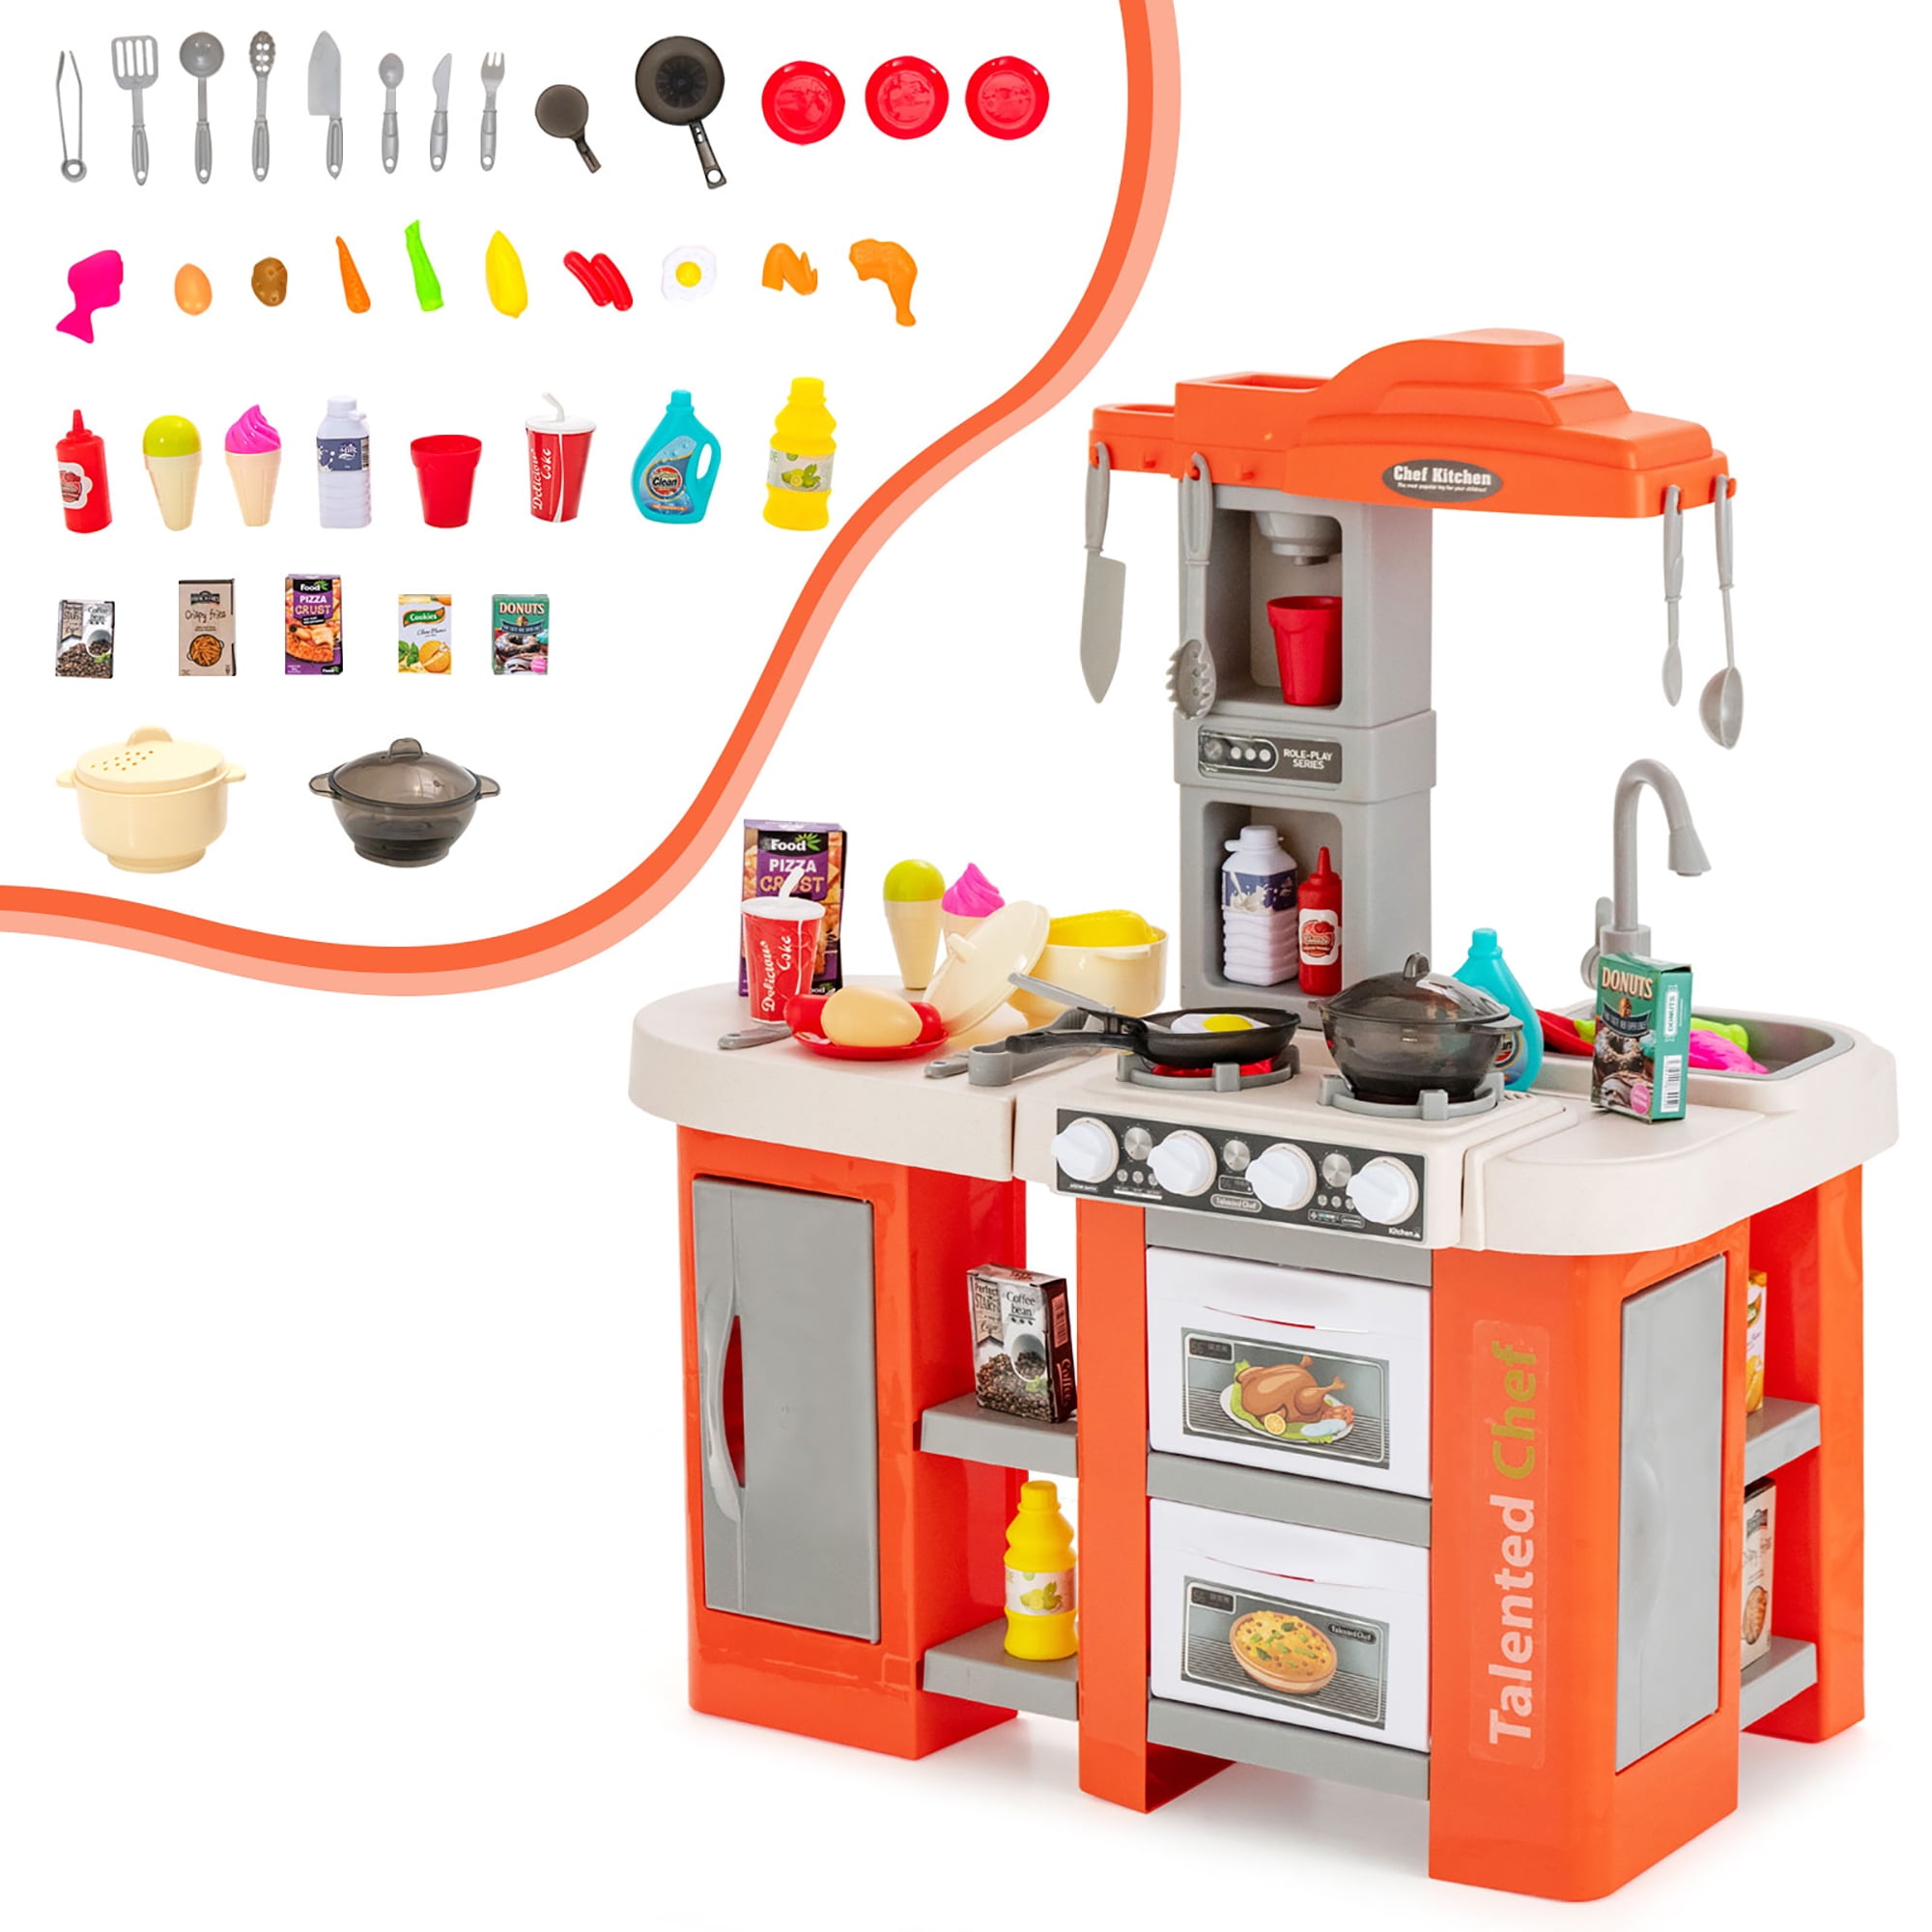 Costway Pretend Play Kitchen Wooden Toy Set for Kids w/ Realistic Light & Sound